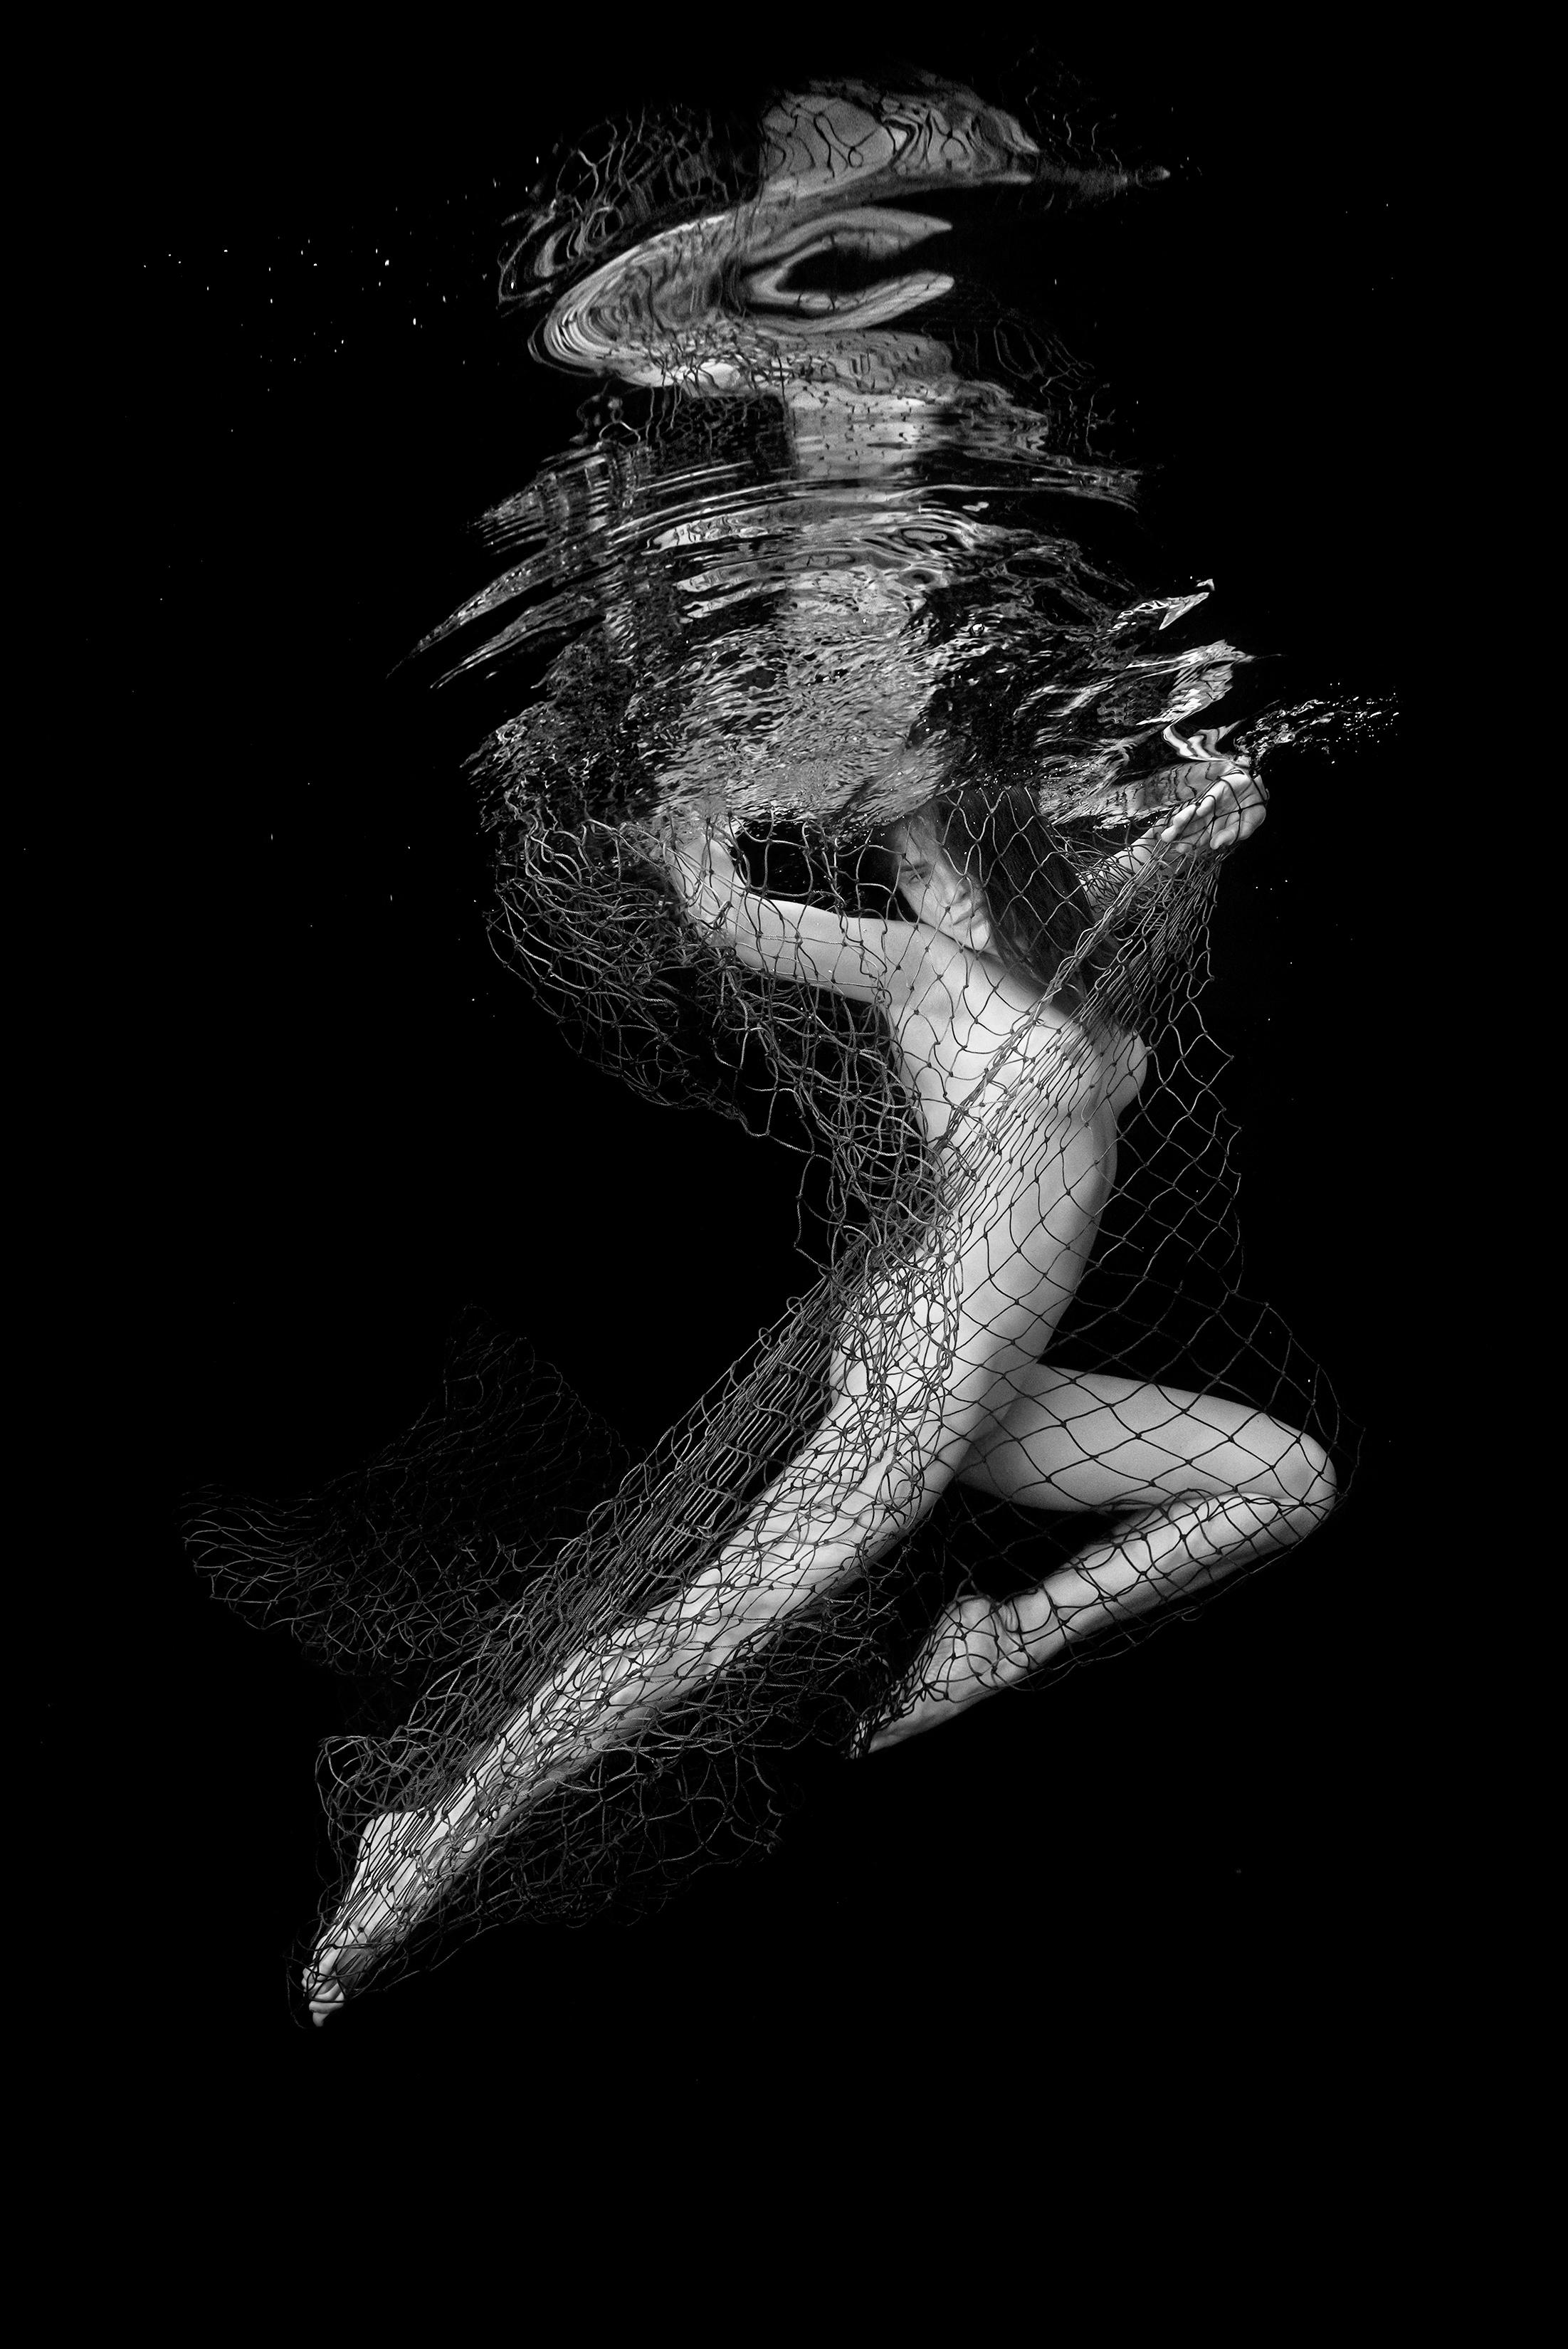 Alex Sher Black and White Photograph - Miraculous Catch - underwater black & white nude photograph - acrylic 36x24"